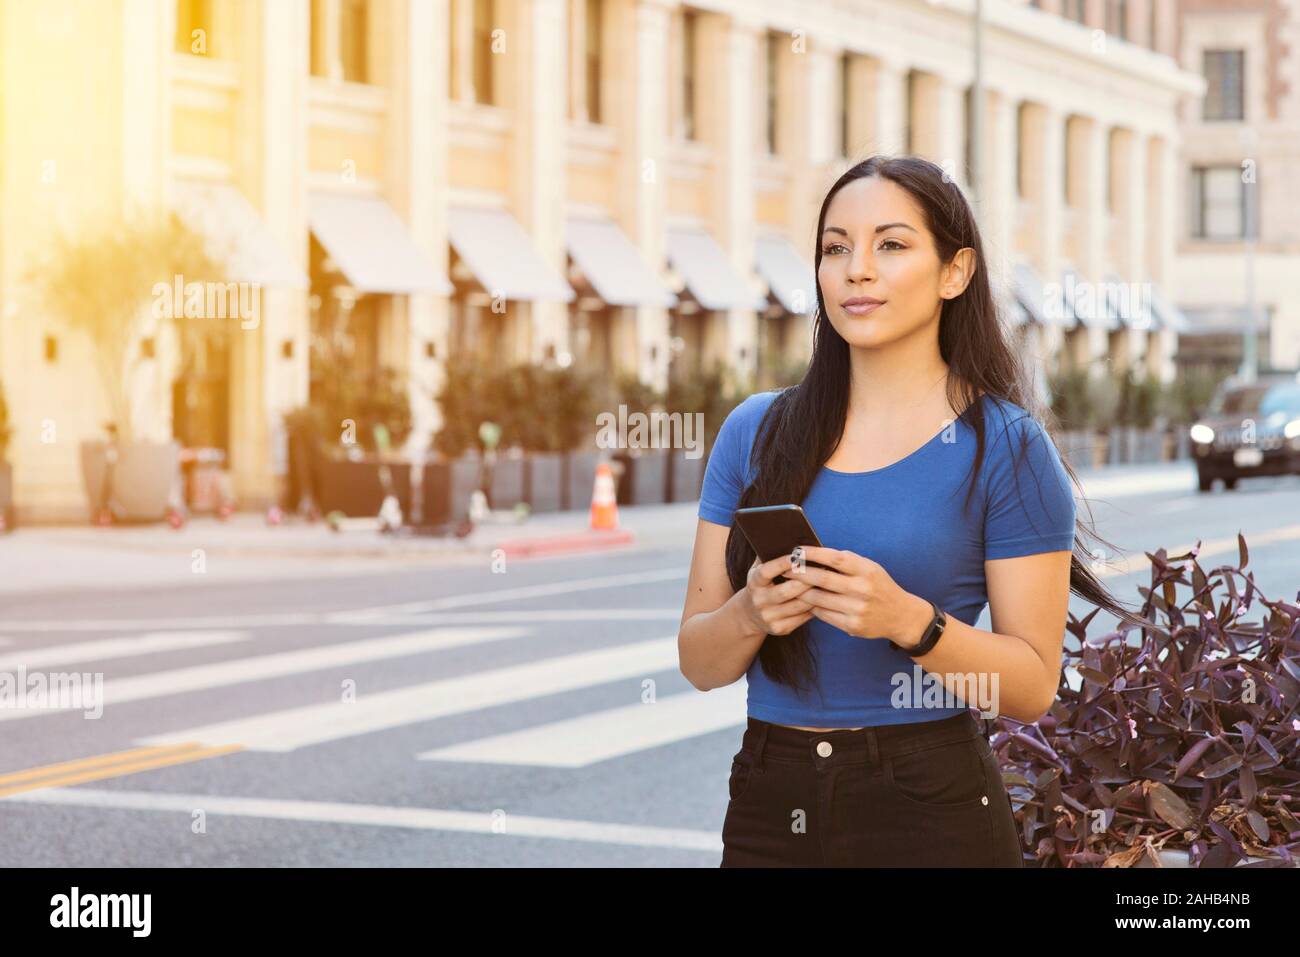 Young attractive girl awaits a ride share car in the city - Holding smart phone waiting on the sidewalk - Daytime with warm lighting Stock Photo